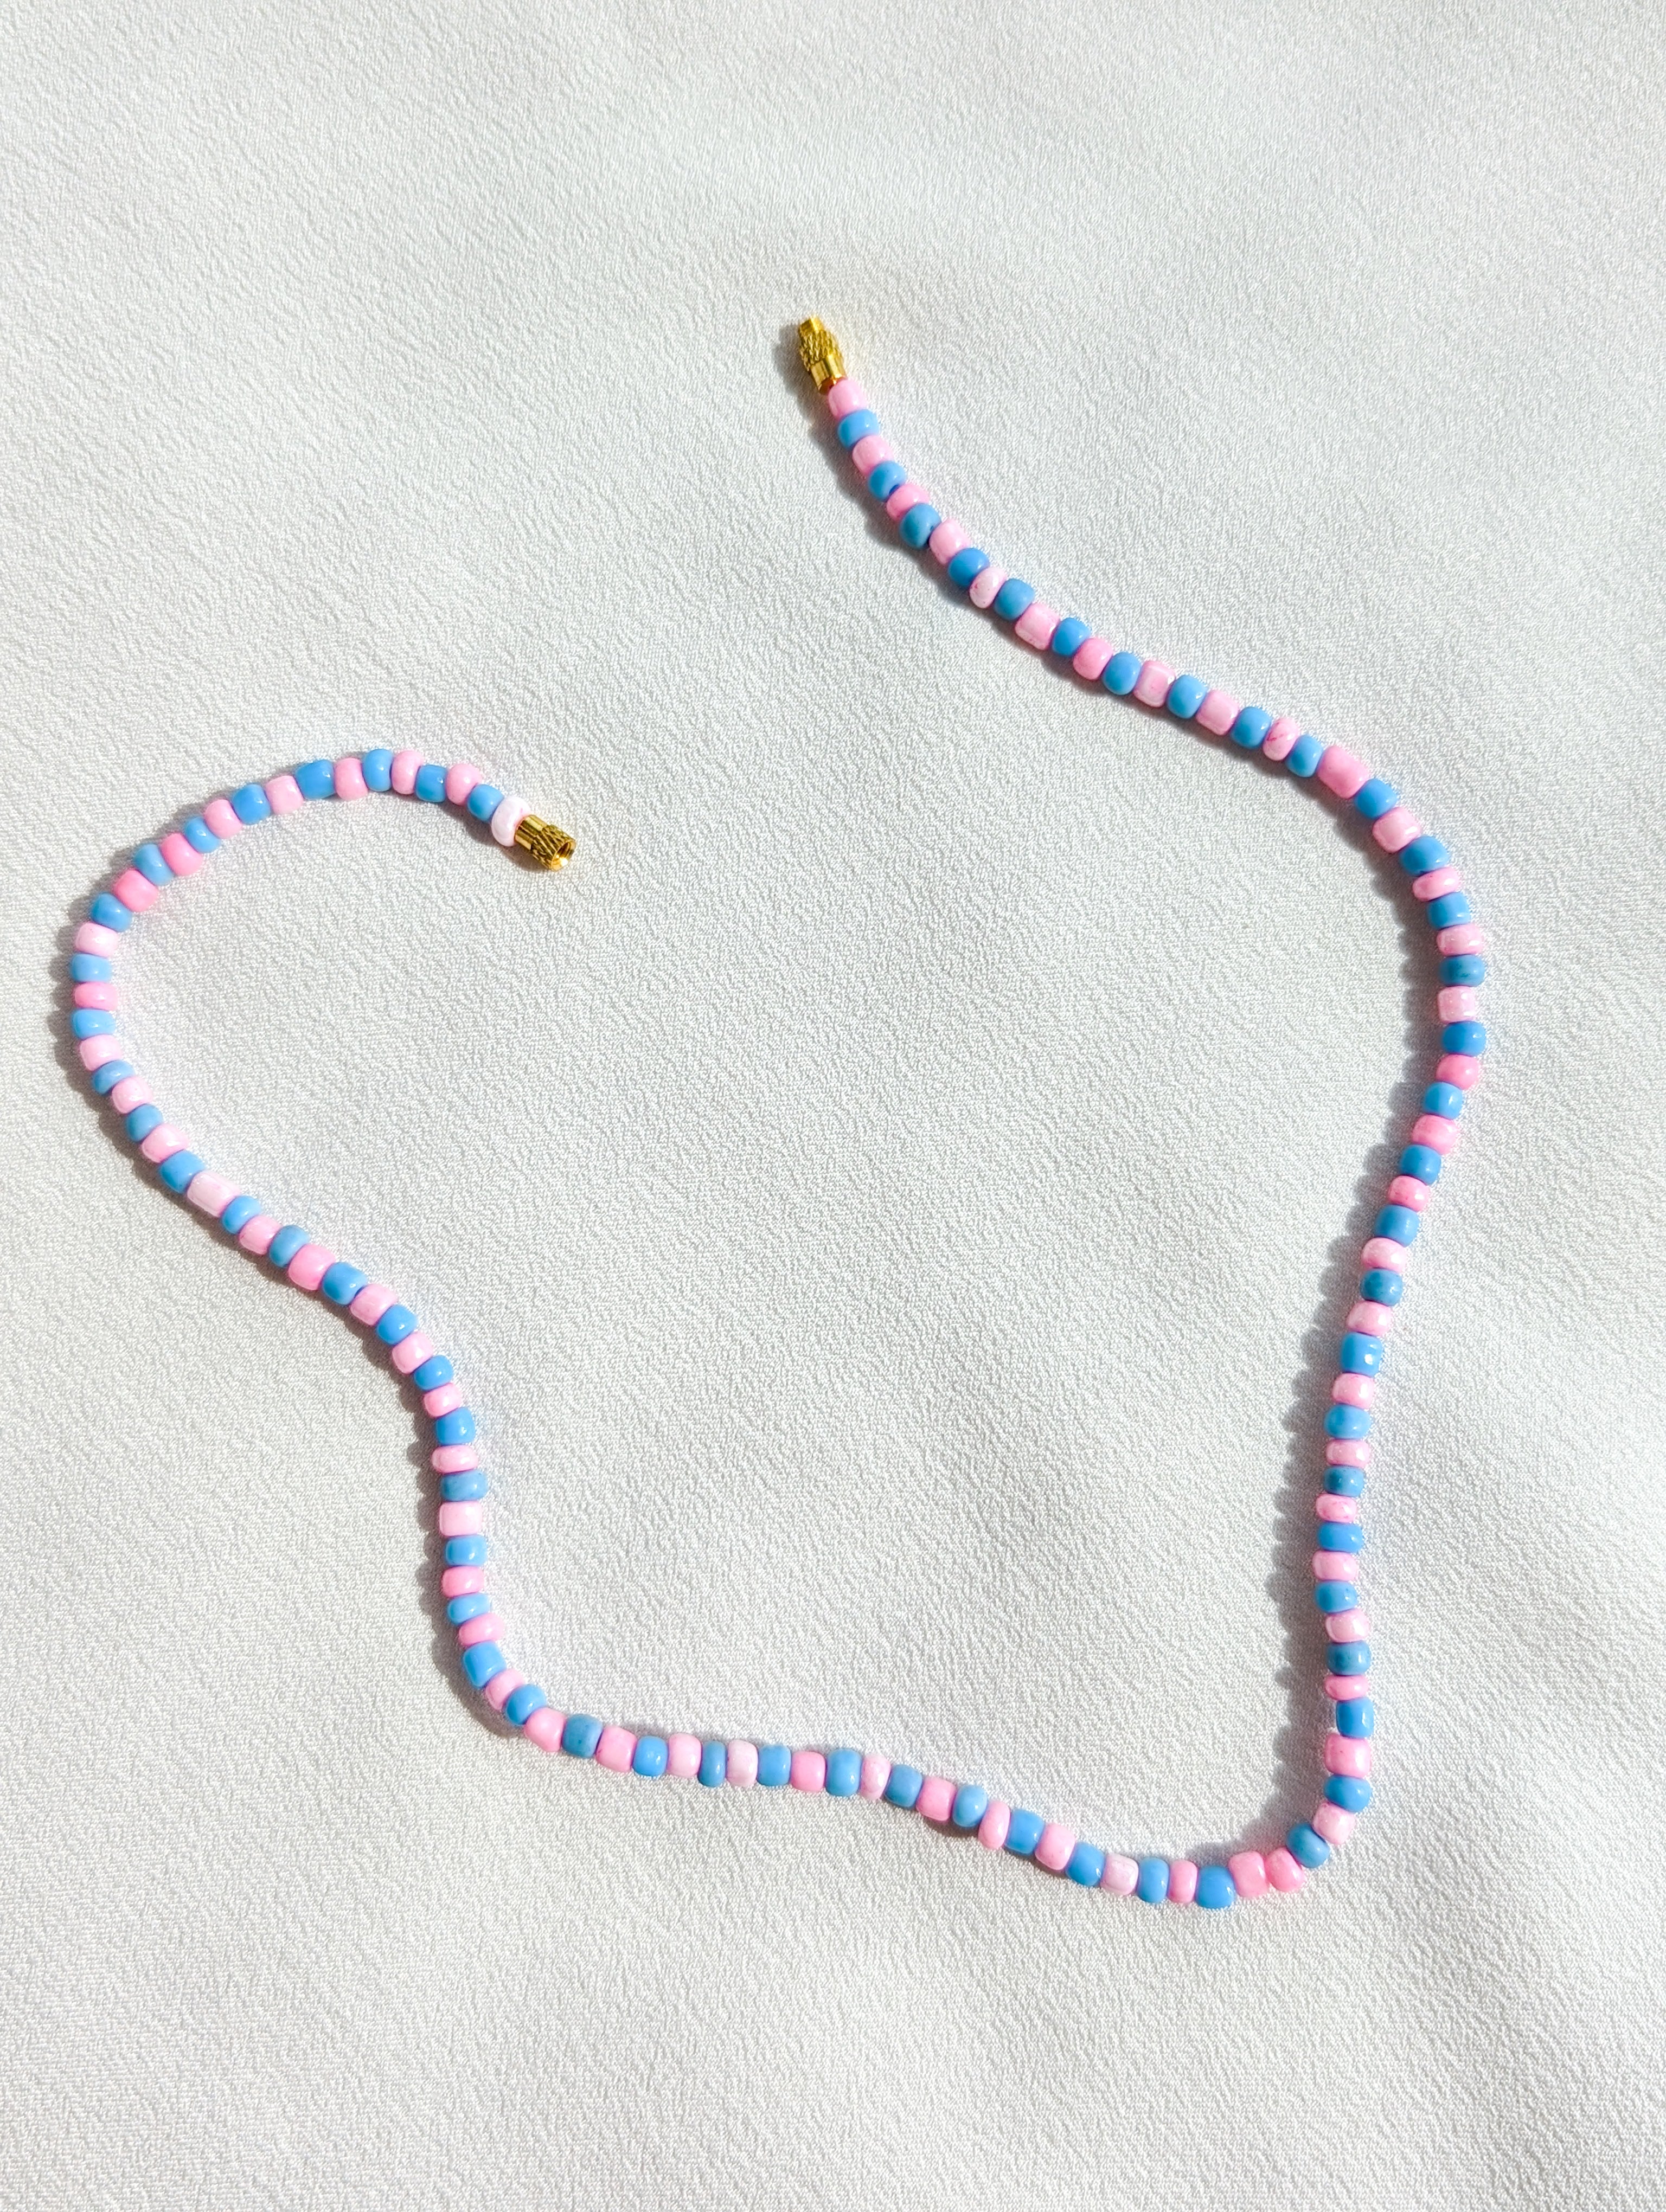 [THE TWO] Necklace: Pink/Blue [Large Beads]